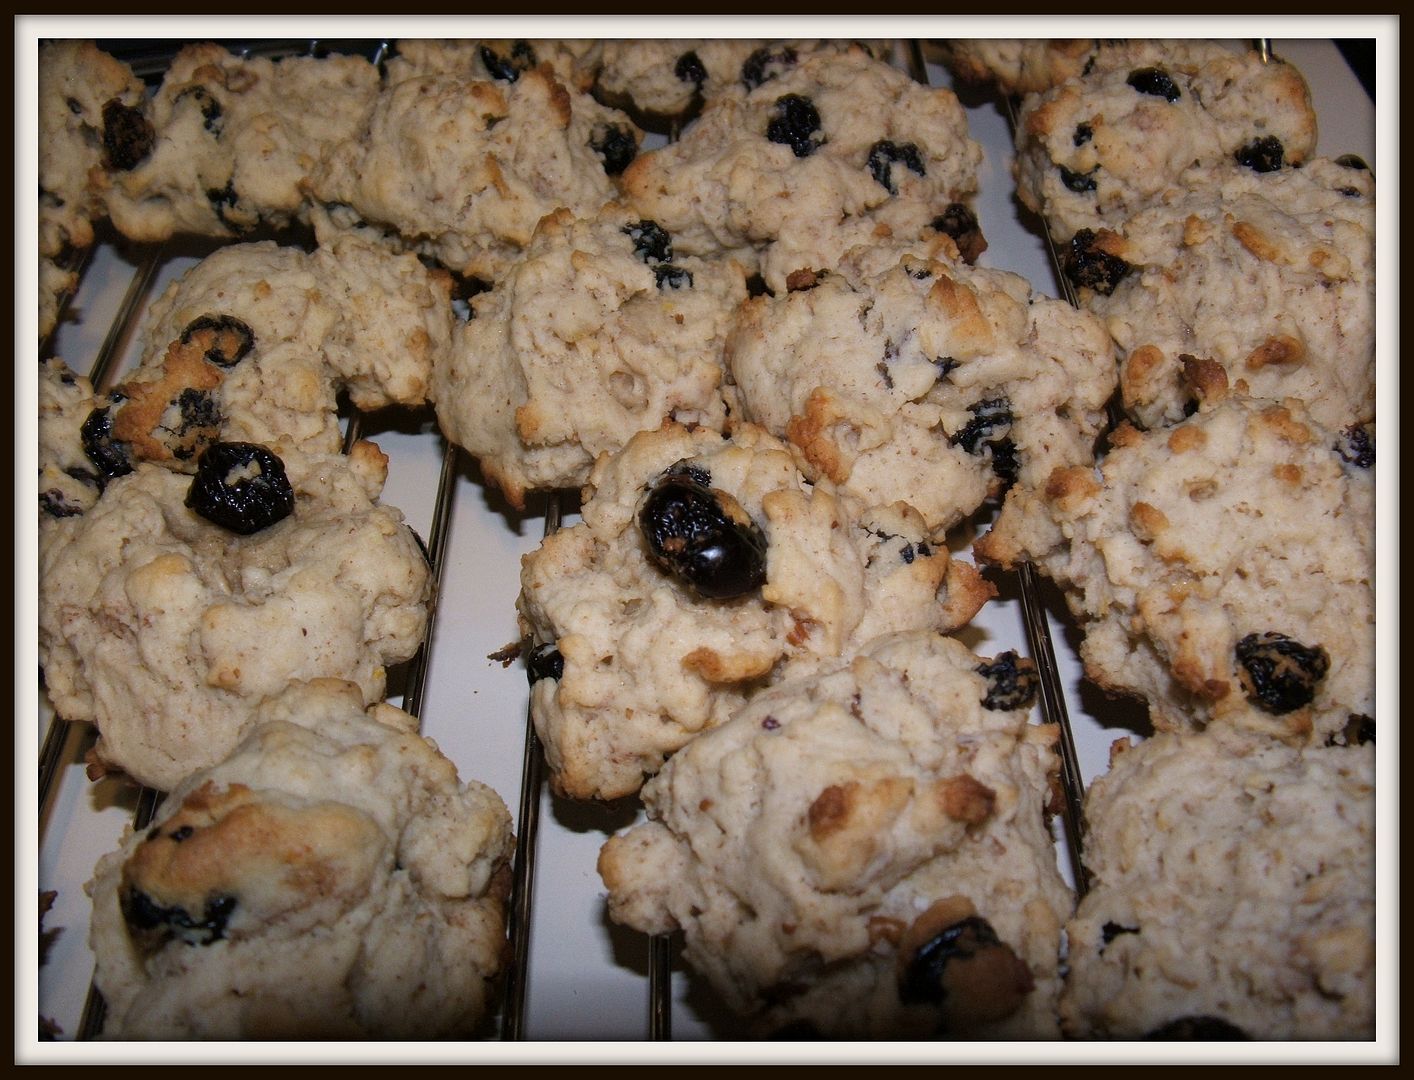 Lemon Blueberry Cookies by Angie Ouellette-Tower for godsgrowinggarden.com photo 006_zps39cad199.jpg